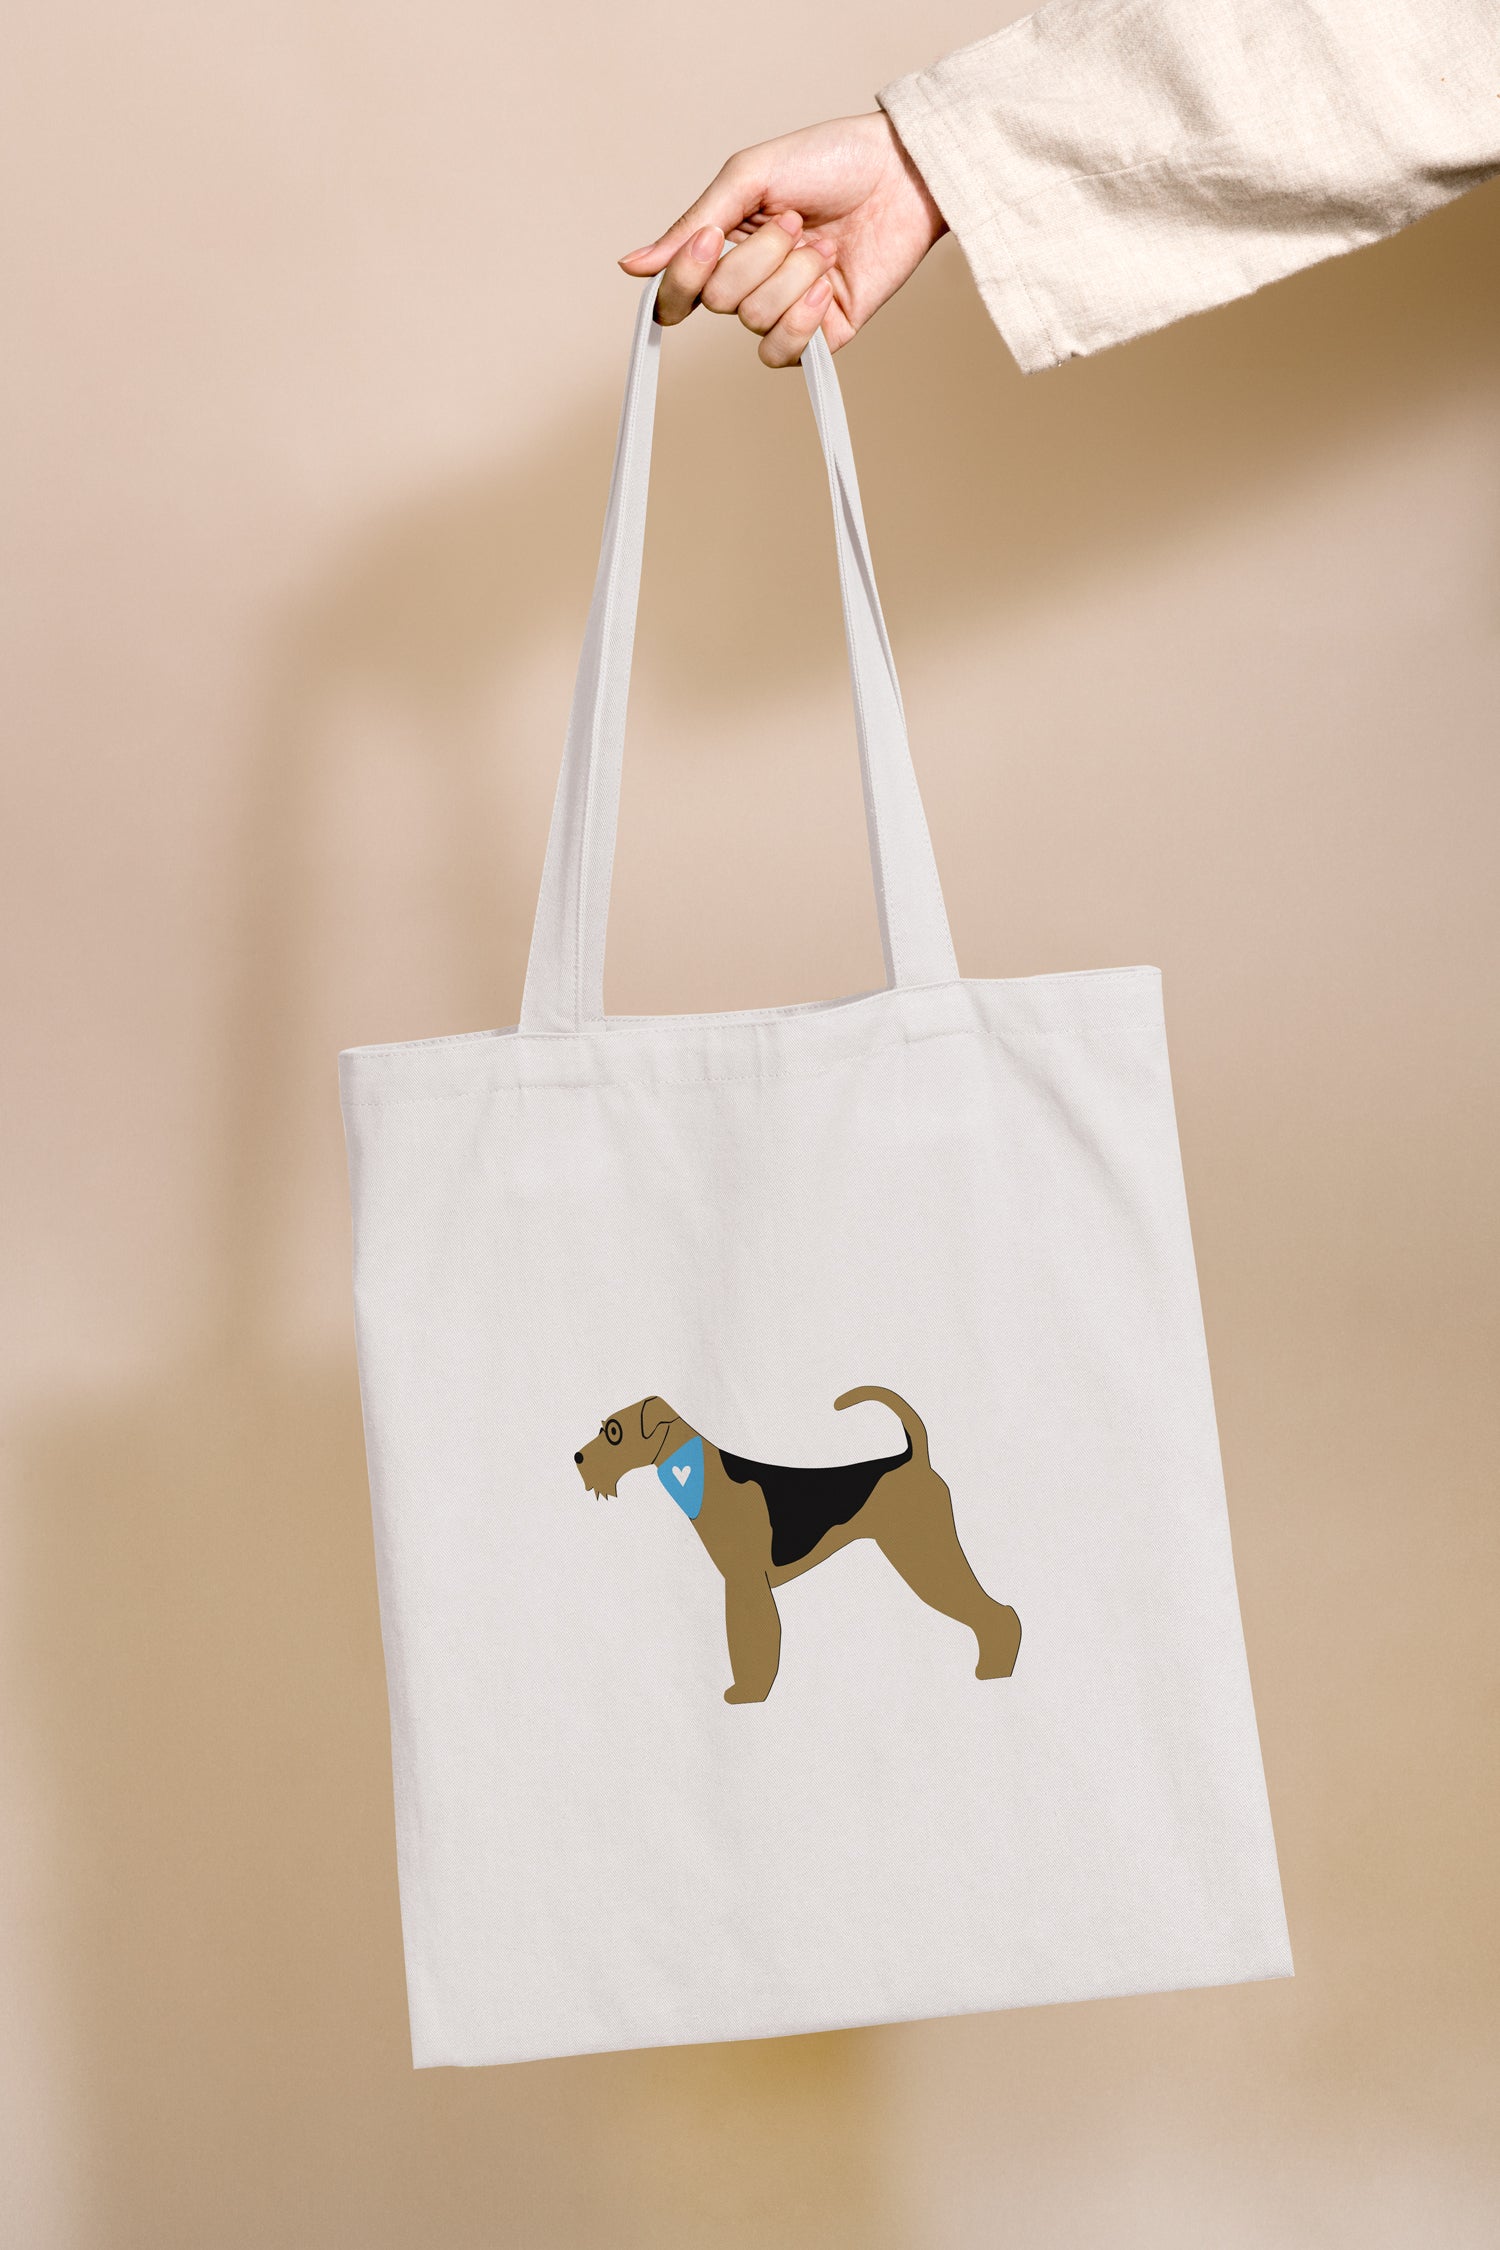 100% Cotton Tote Bags